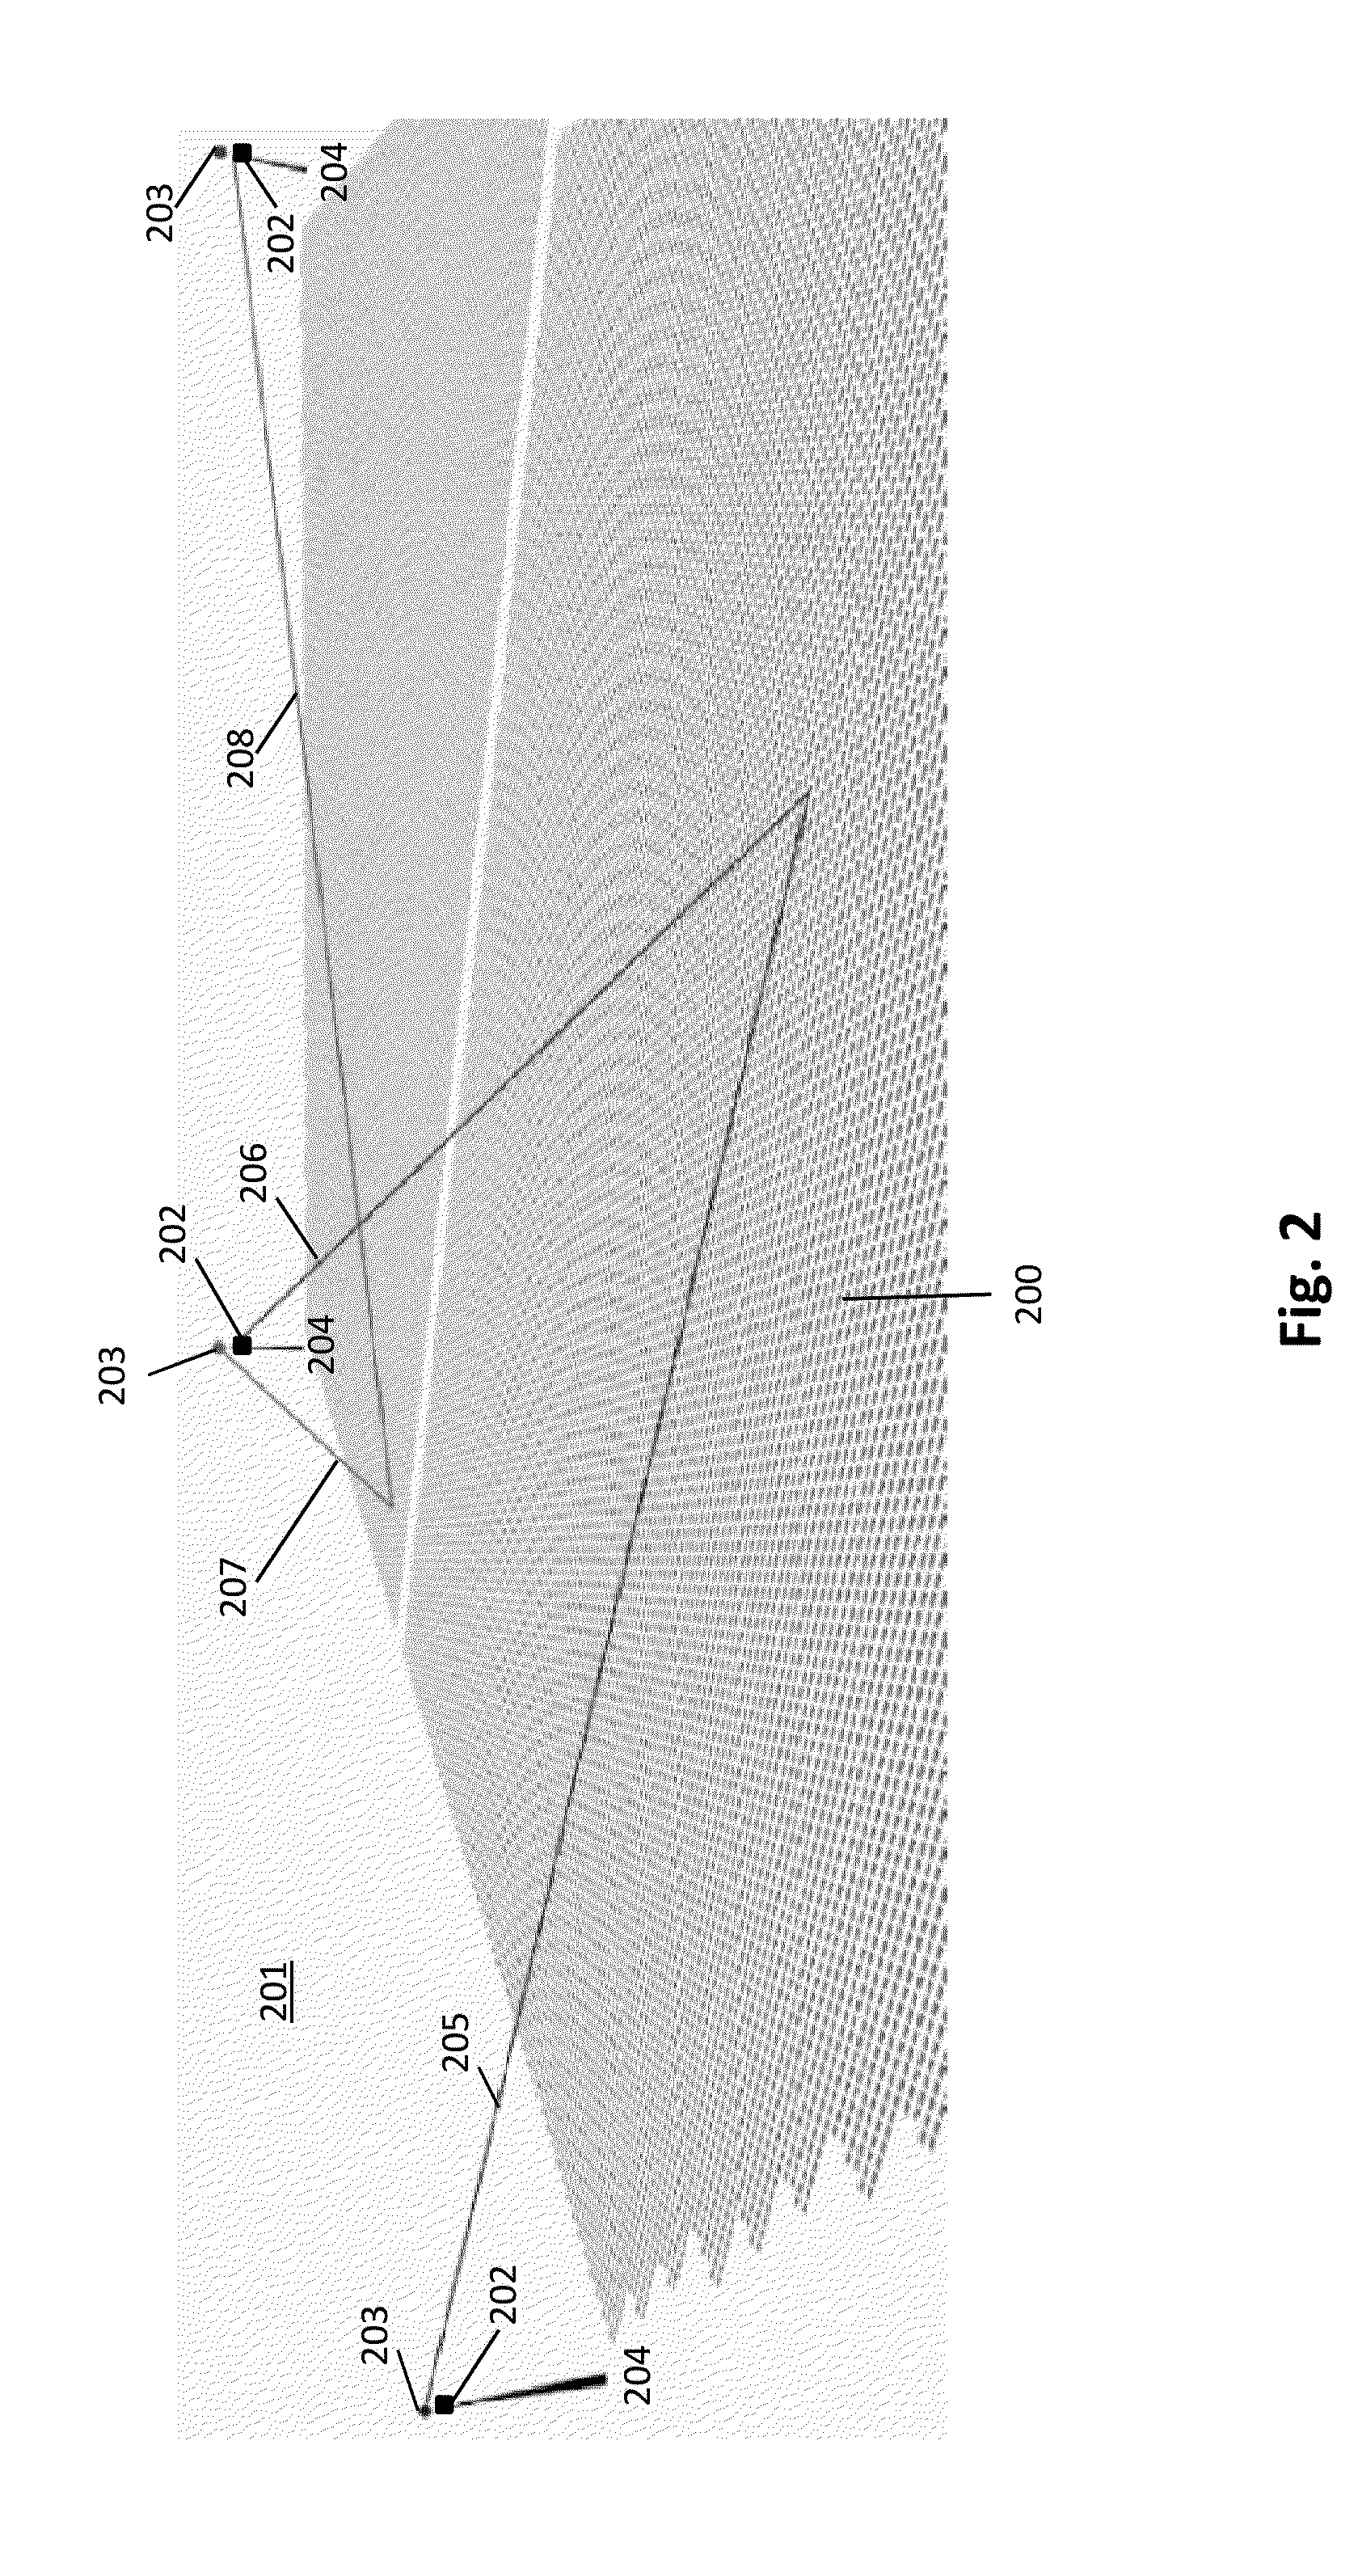 System and Method for Detecting Heliostat Failures Using Artificial Light Sources